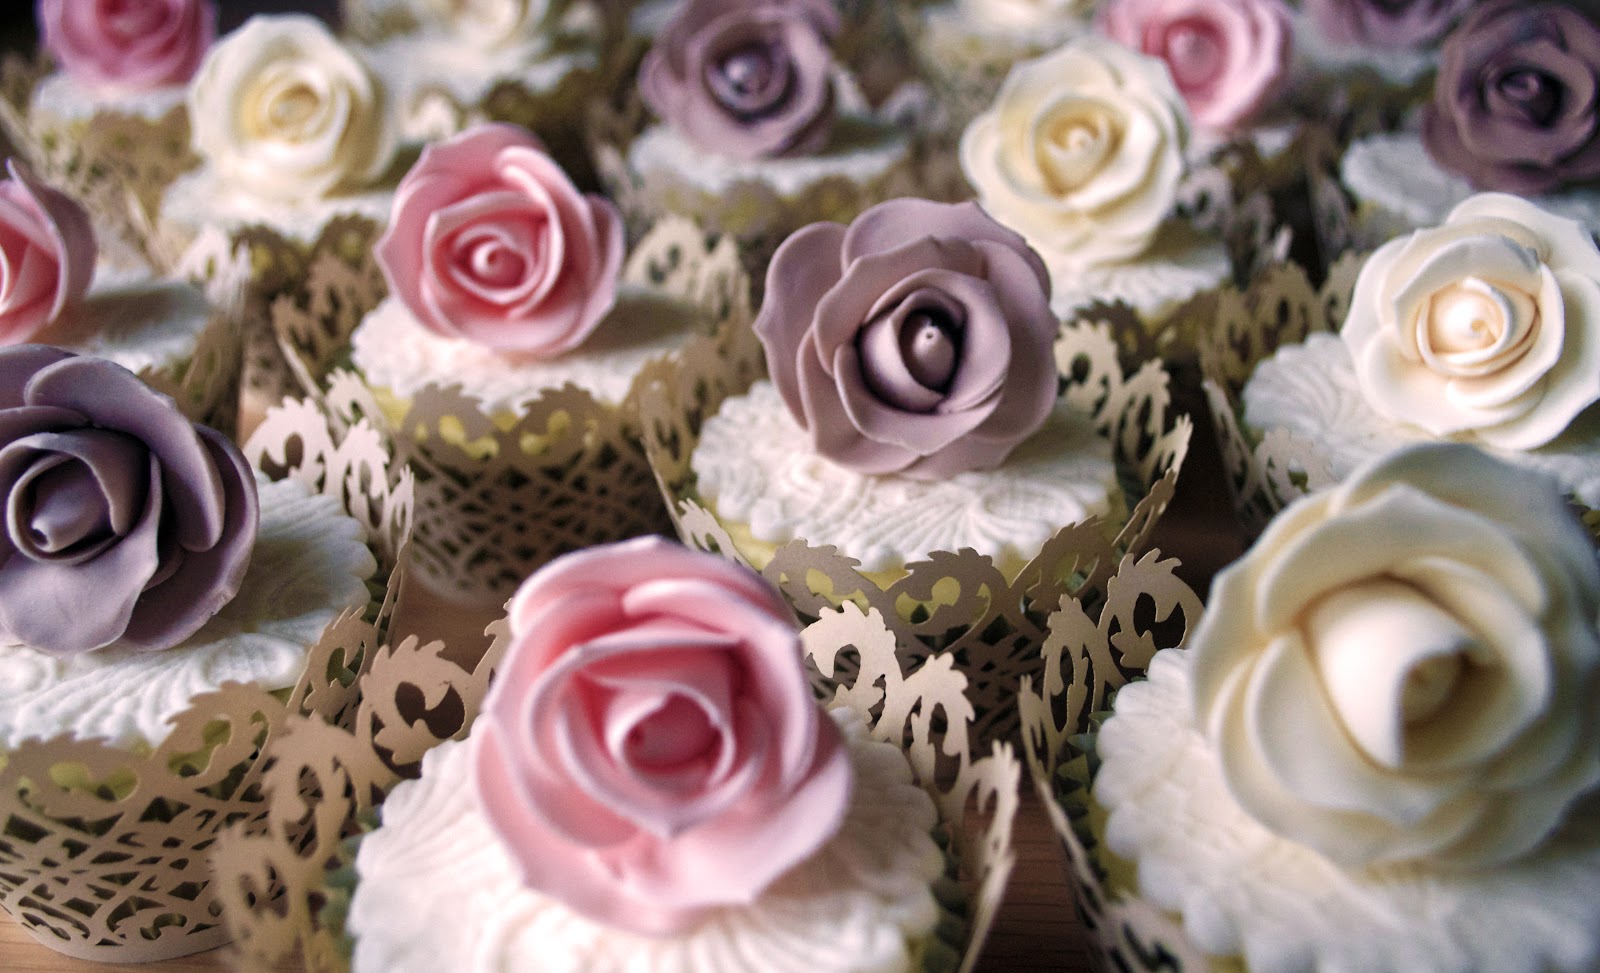 vintage vintage cupcakes facebook rose  and embossed roses cake   buttercream, lace with cupcakes lemon